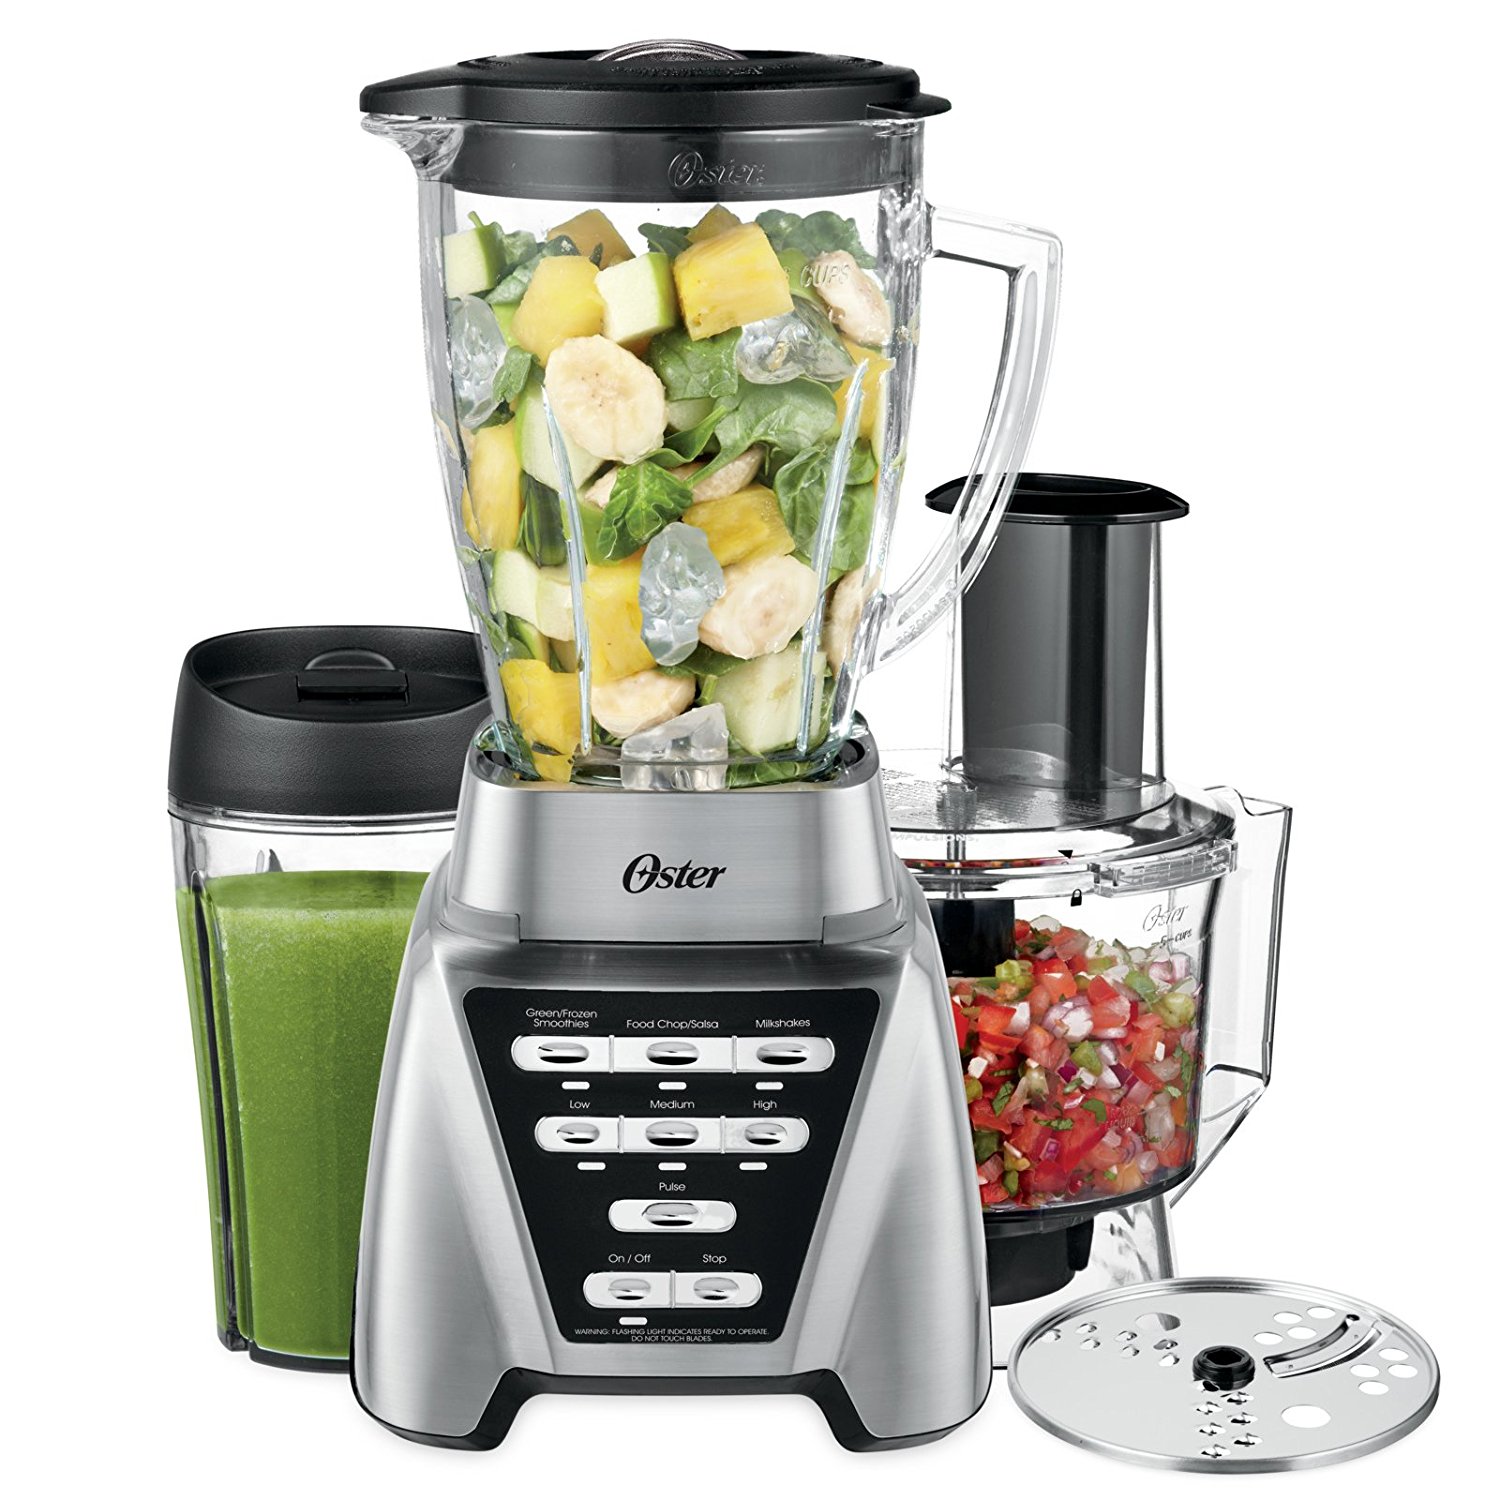 Oster Pro 1200 Blender 3-in-1 with Food Processor Attachment